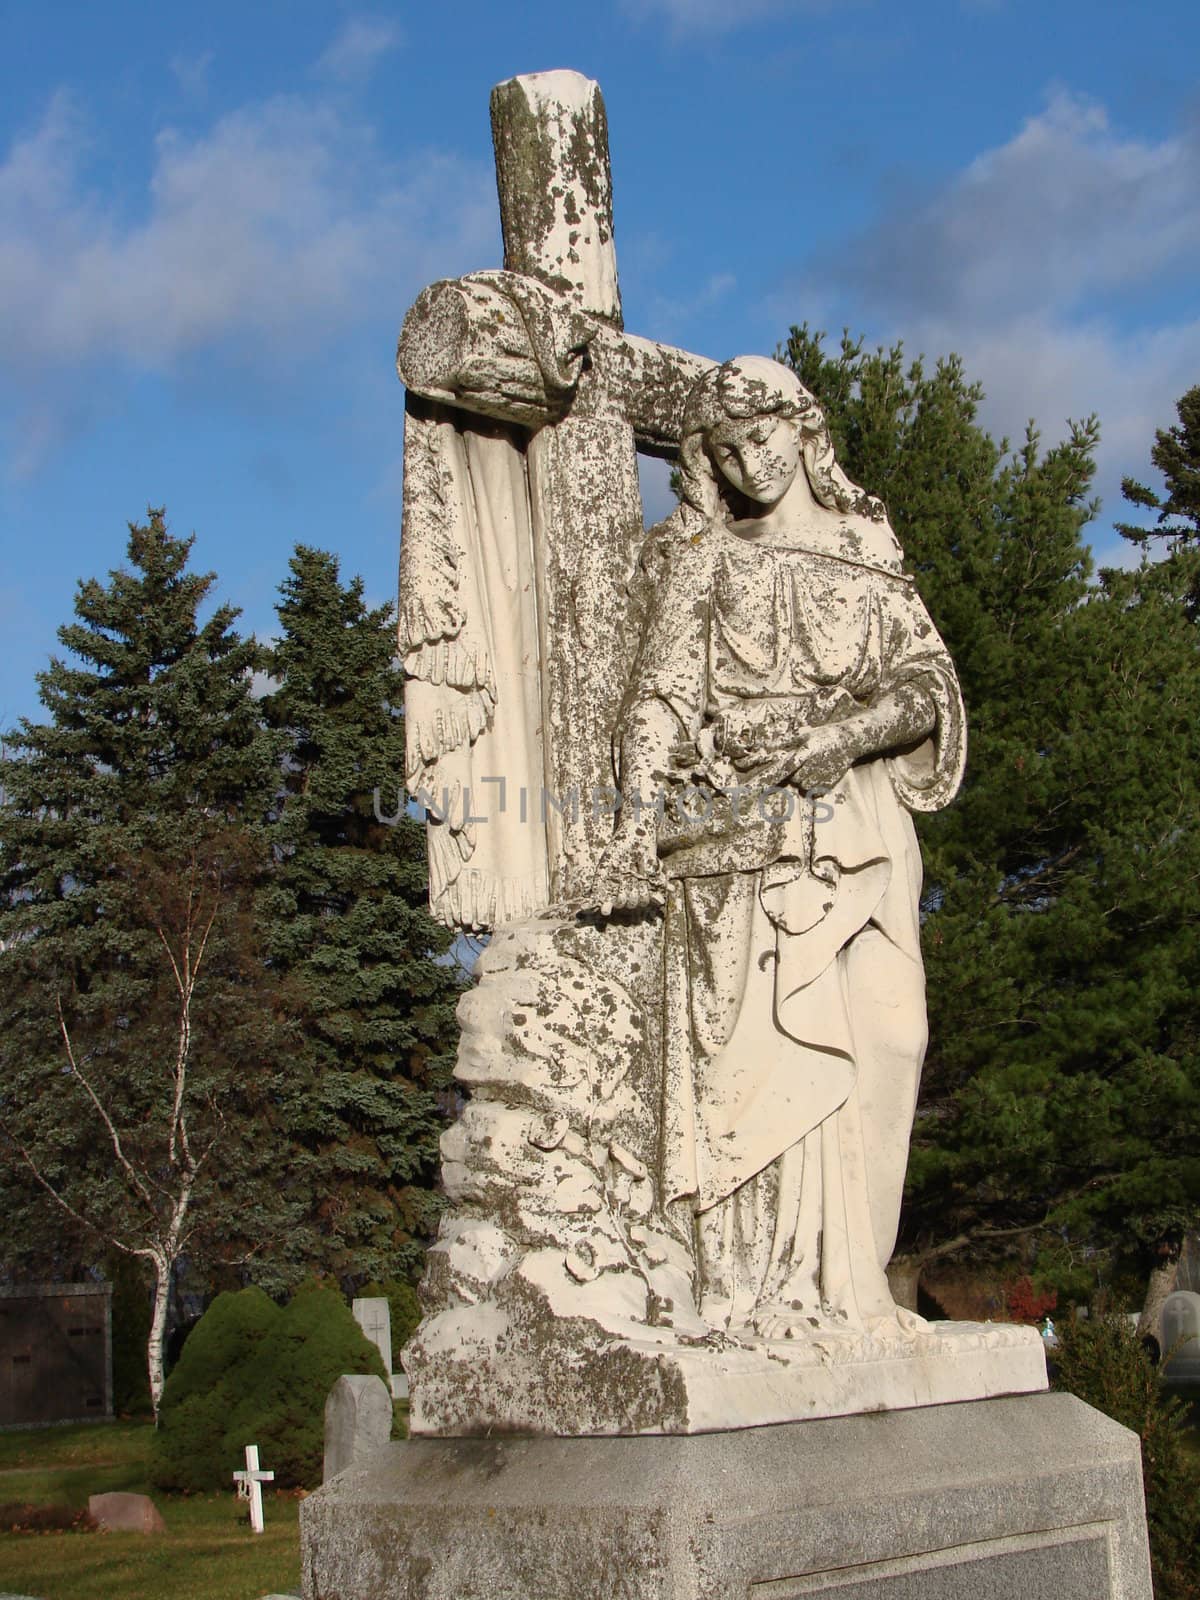 White marble statue of Mary in Catholic Cemetery. Statue has moss and lichen on it. Fall day with bright blue sky and clouds.